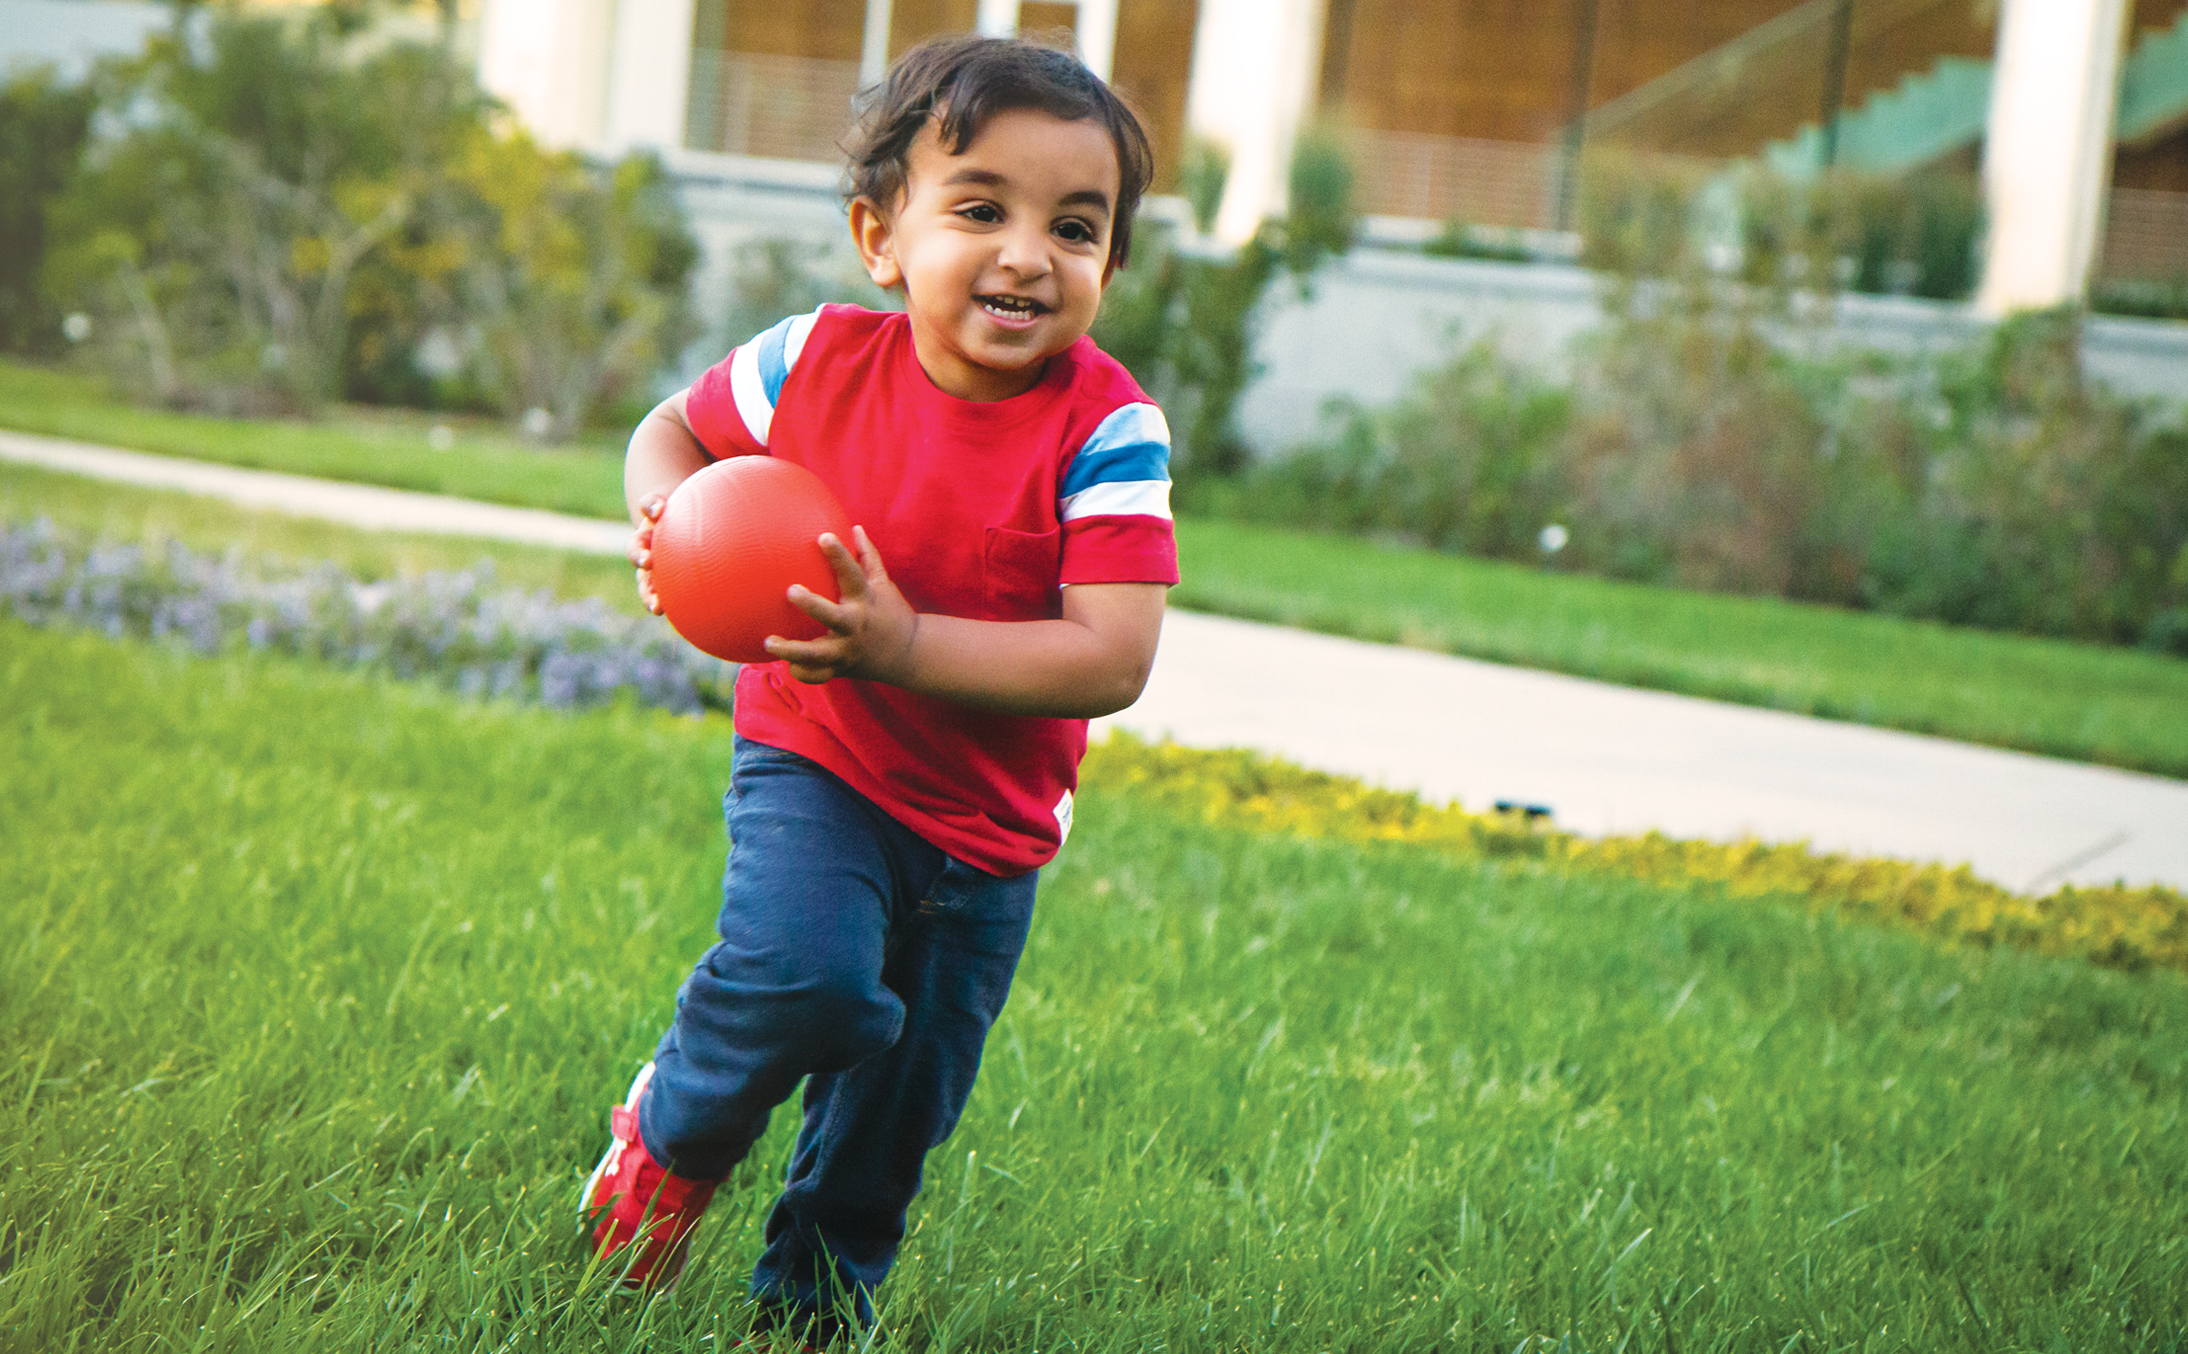 Small child playing on the grass outside. Child is wearing a red shirt with jeans, and is running with a small orange ball. 